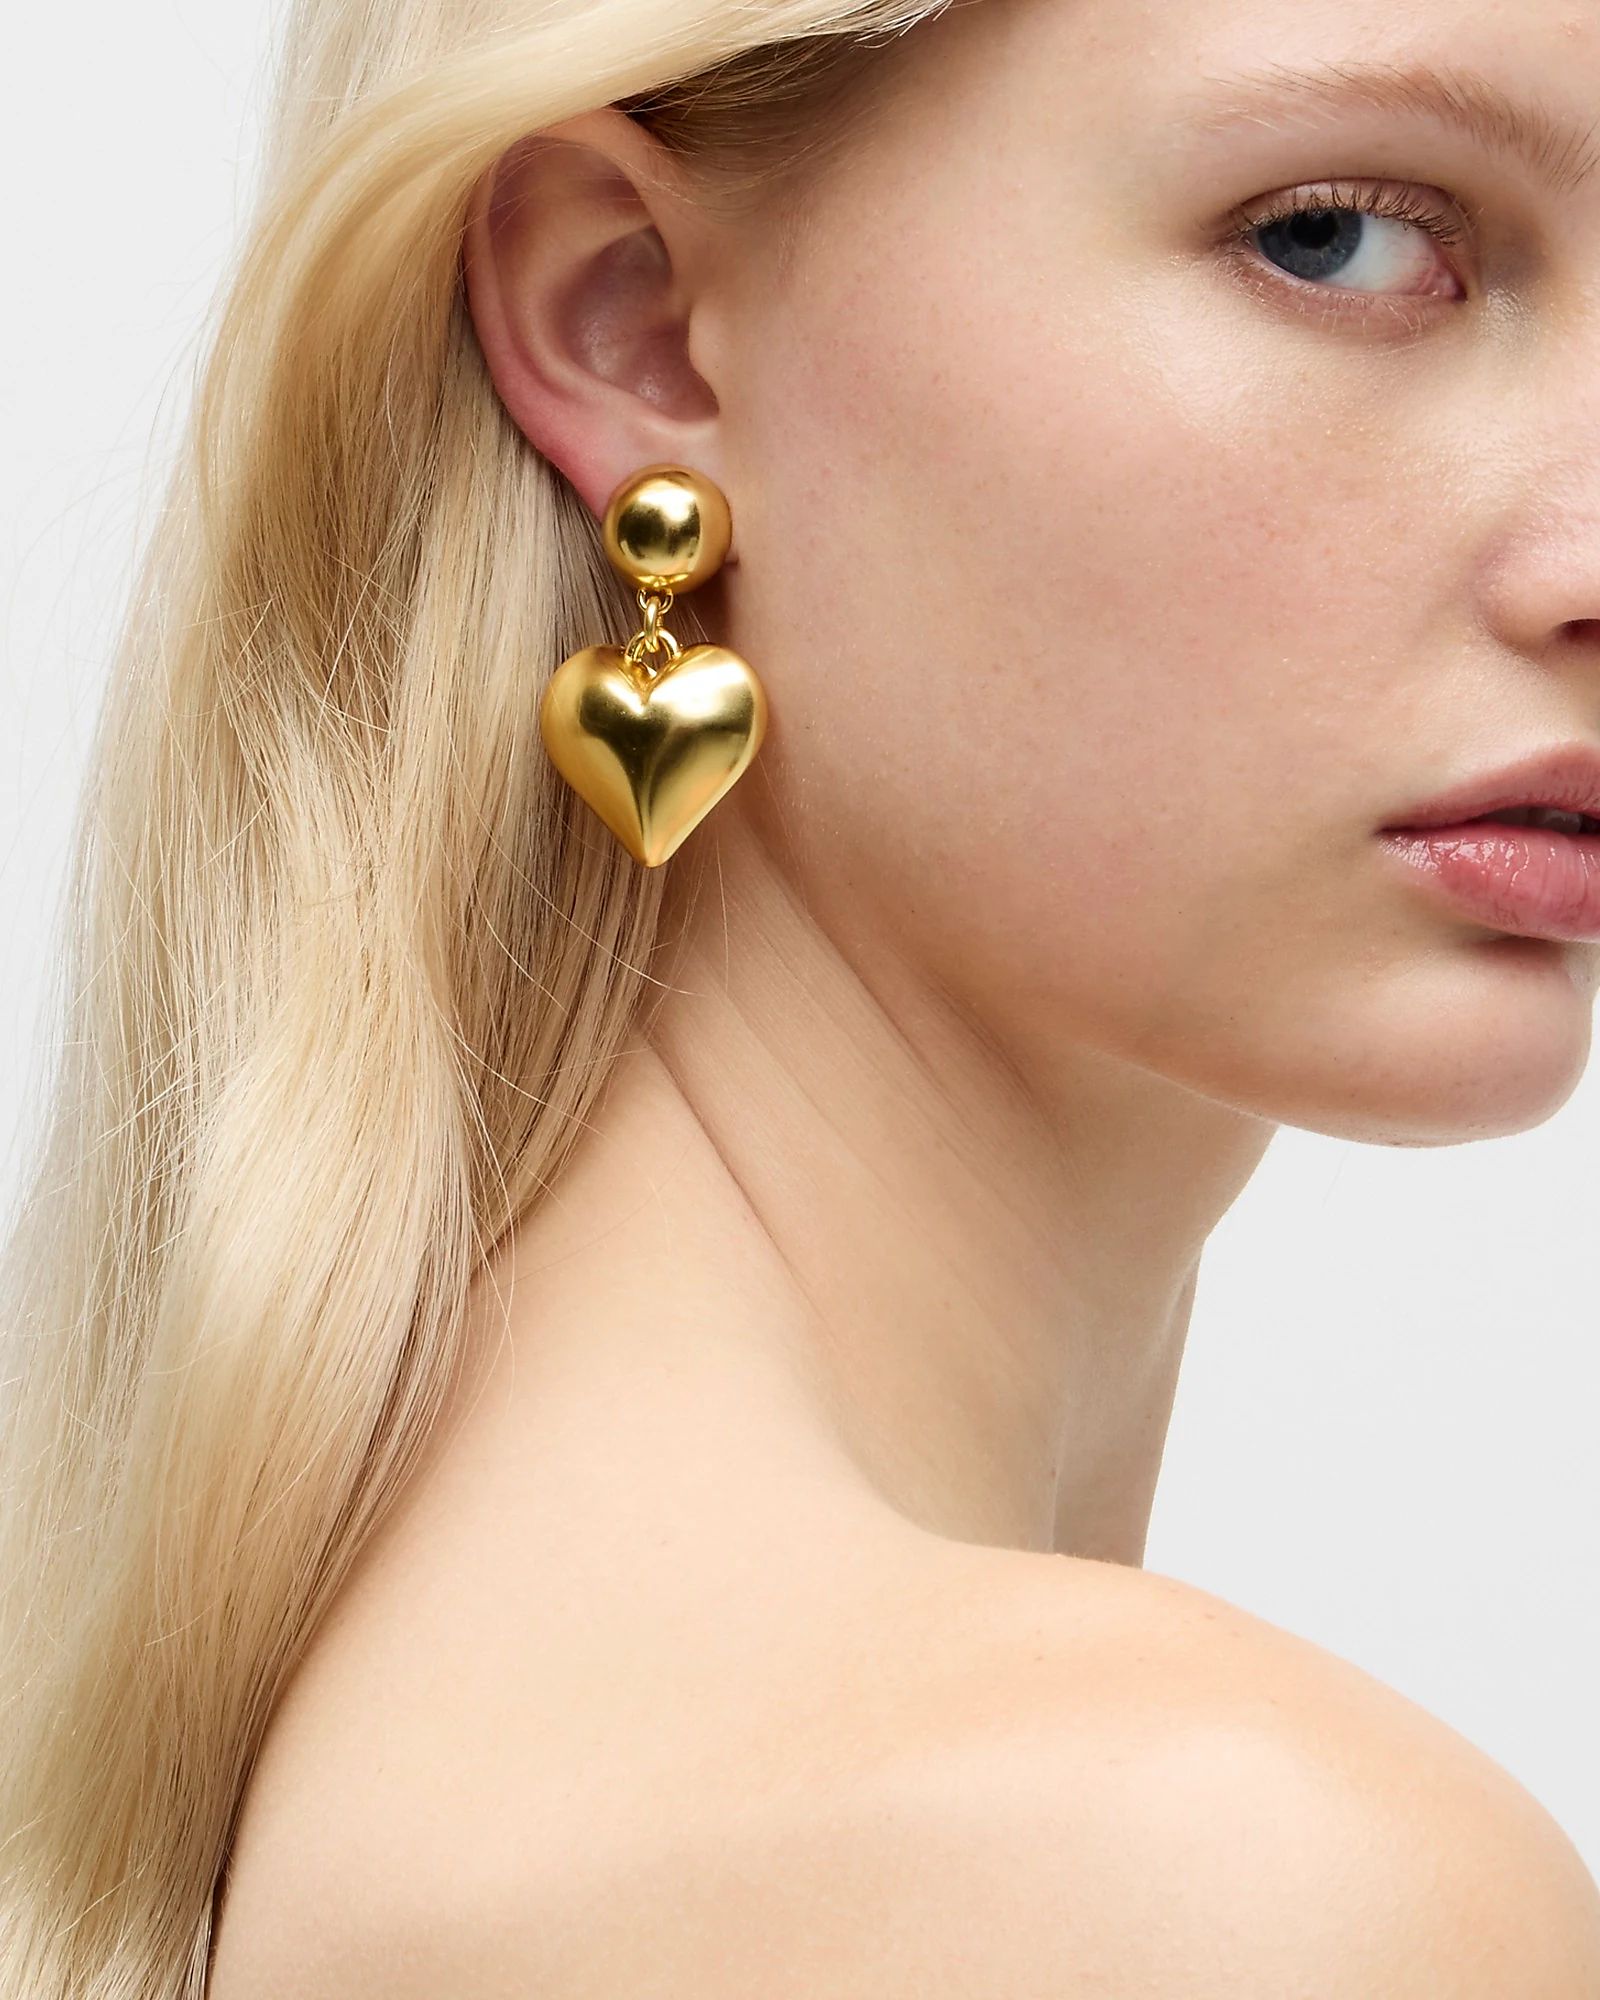 top rated5.0(10 REVIEWS)Heart drop earrings$29.50-$39.50$49.50Burnished Gold$39.50$29.50One SizeS... | J.Crew US